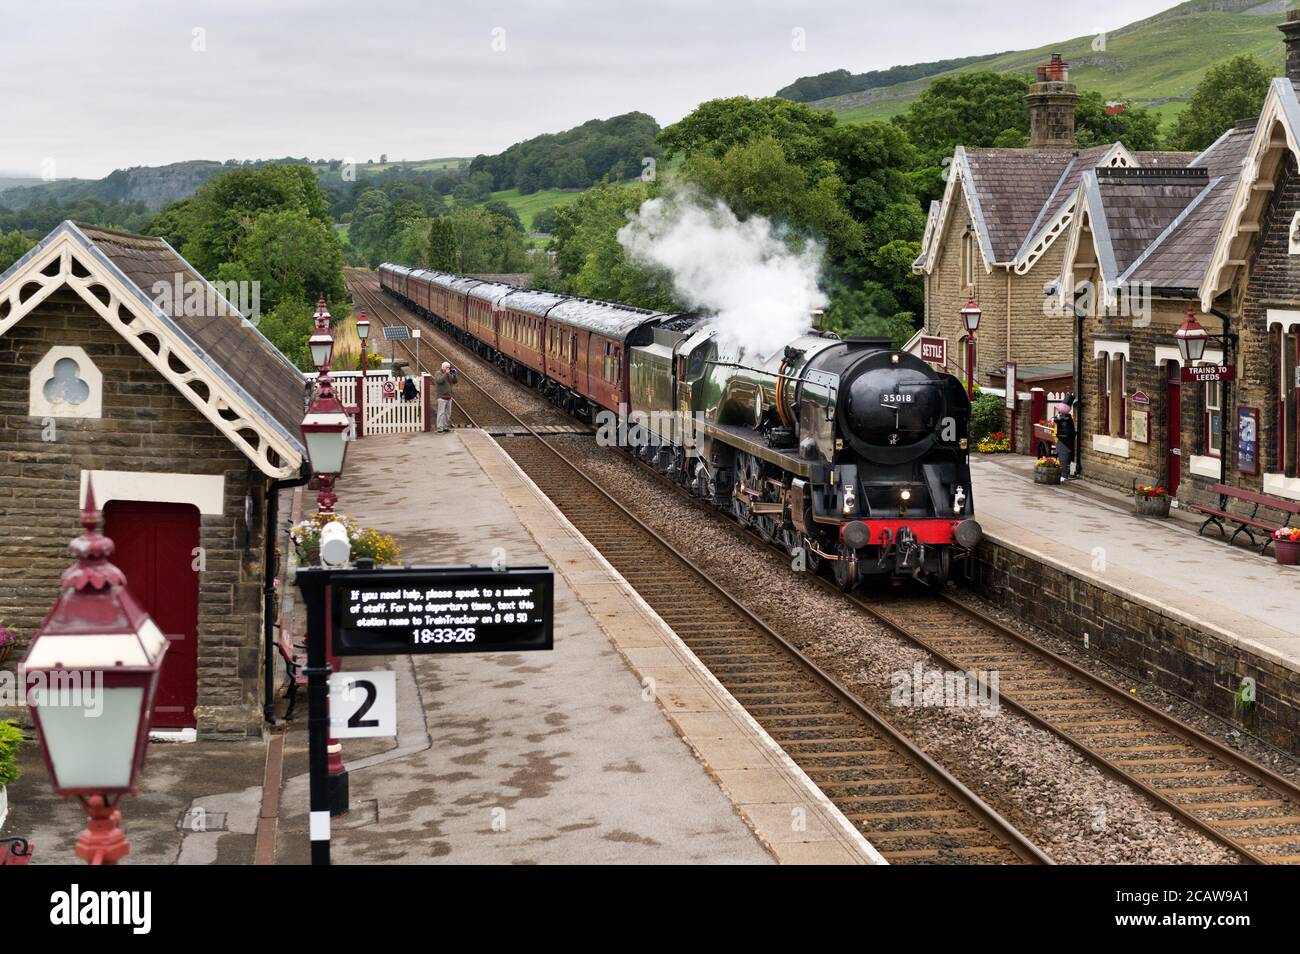 'The Dalesman' steam special heading south through Settle Station on the Settle-Carlisle railway line, 4th August 2020. Loco is 'British India Line'. Stock Photo